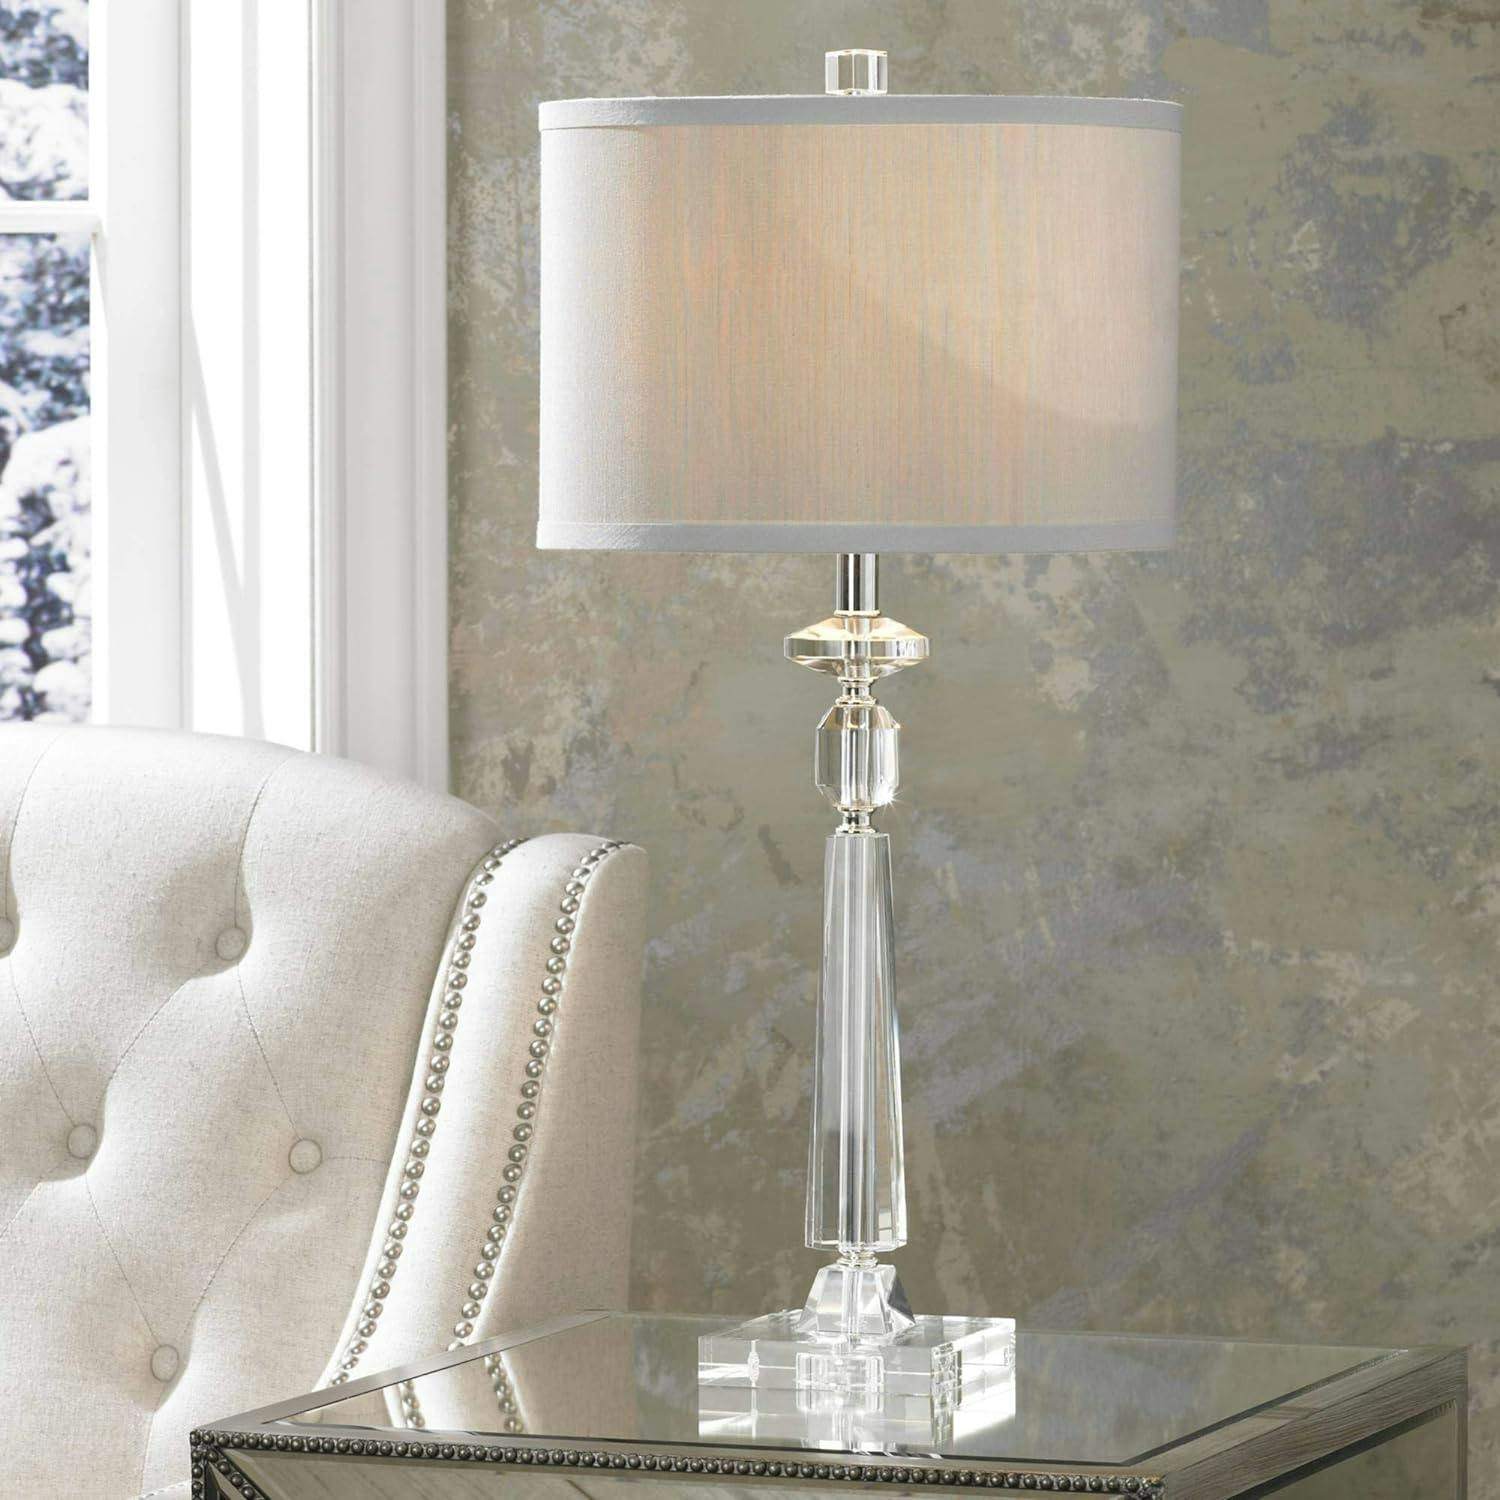 Geometric Crystal Column Table Lamps with Gray Drum Shade - Set of 2